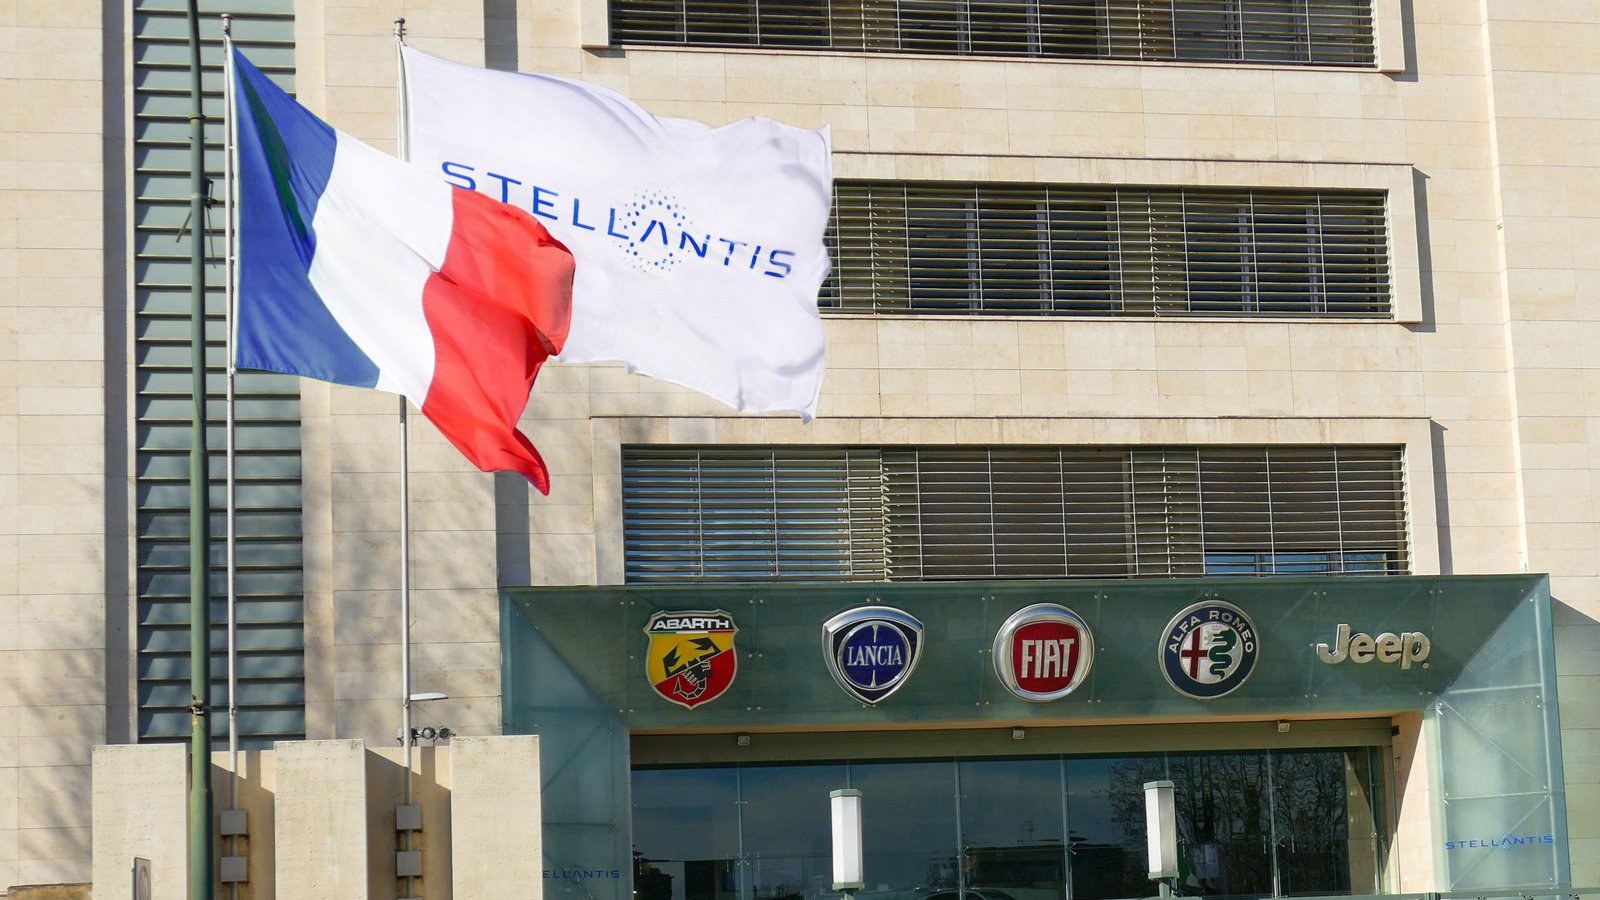 STLA Stock. A flag with the logo for Stellantis waves outside a building with the logos for some of its car brands, including Abarth, Lancia, Fiat, Alfa Romeo and Jeep.